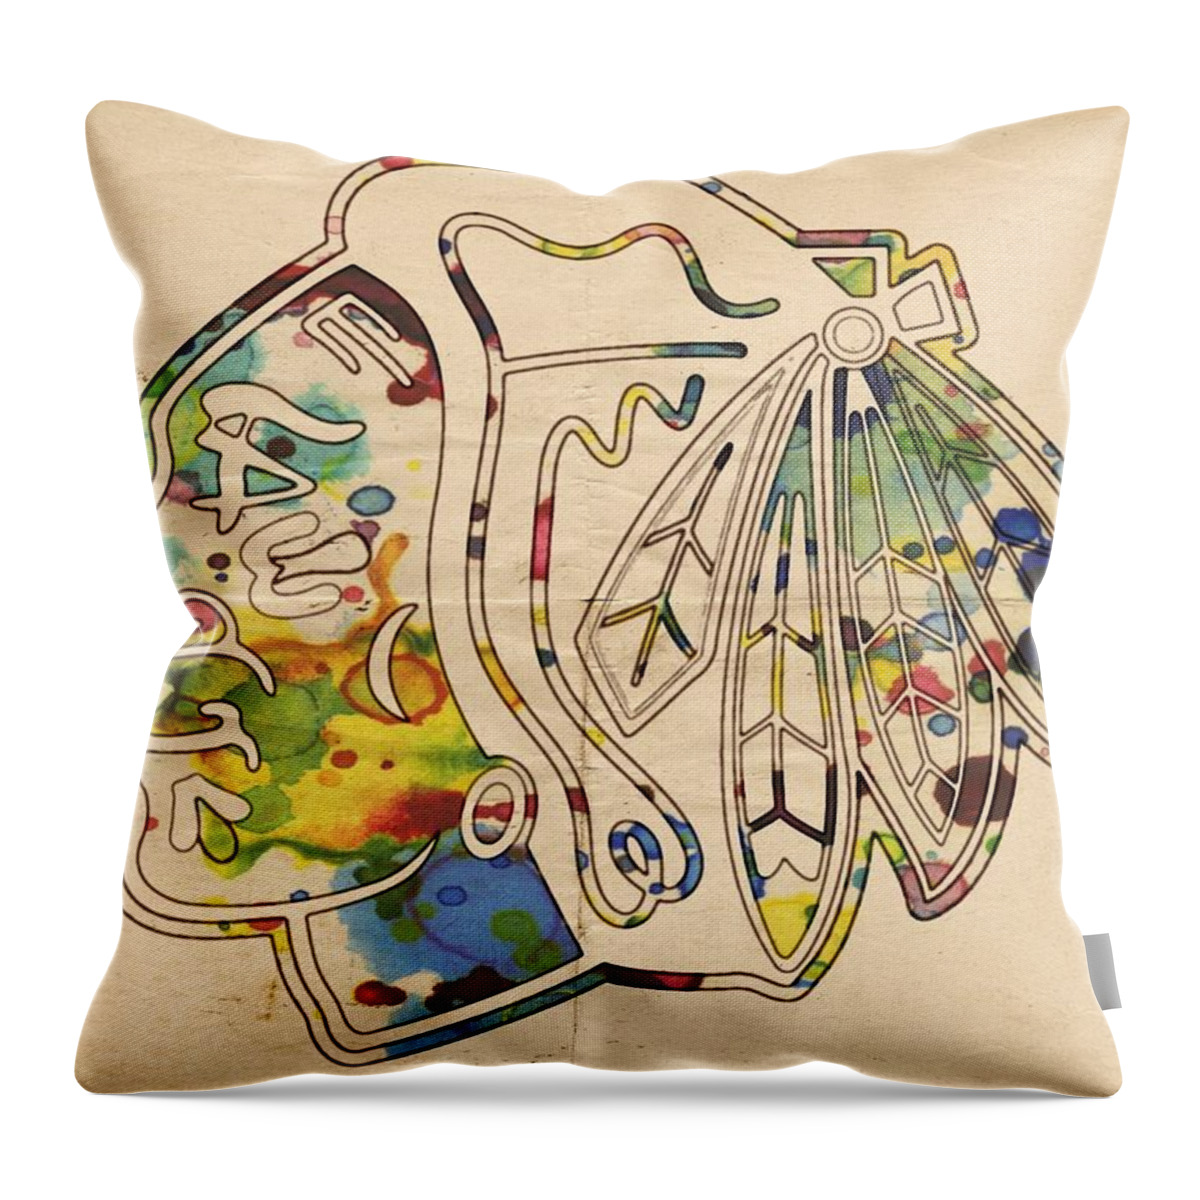 Chicago Blackhawks Throw Pillow featuring the painting Chicago Blackhawks Poster Art by Florian Rodarte